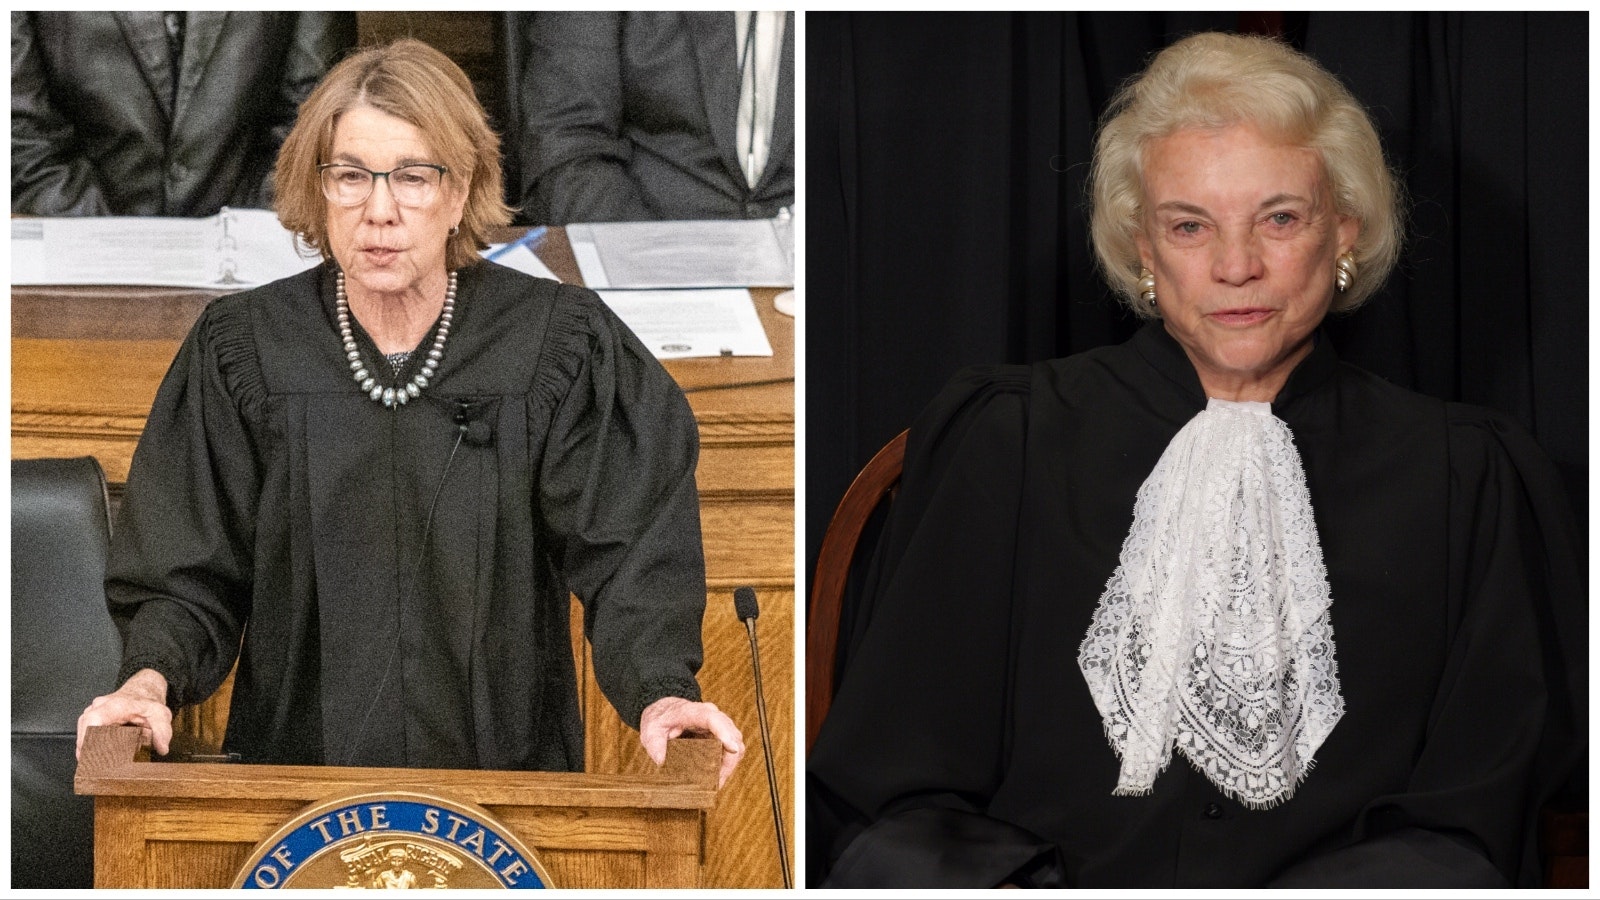 Wyoming Supreme Court Chief Justice Kate Fox, left, and former U.S. Supreme Court Justice Sandra Day O'Connor.